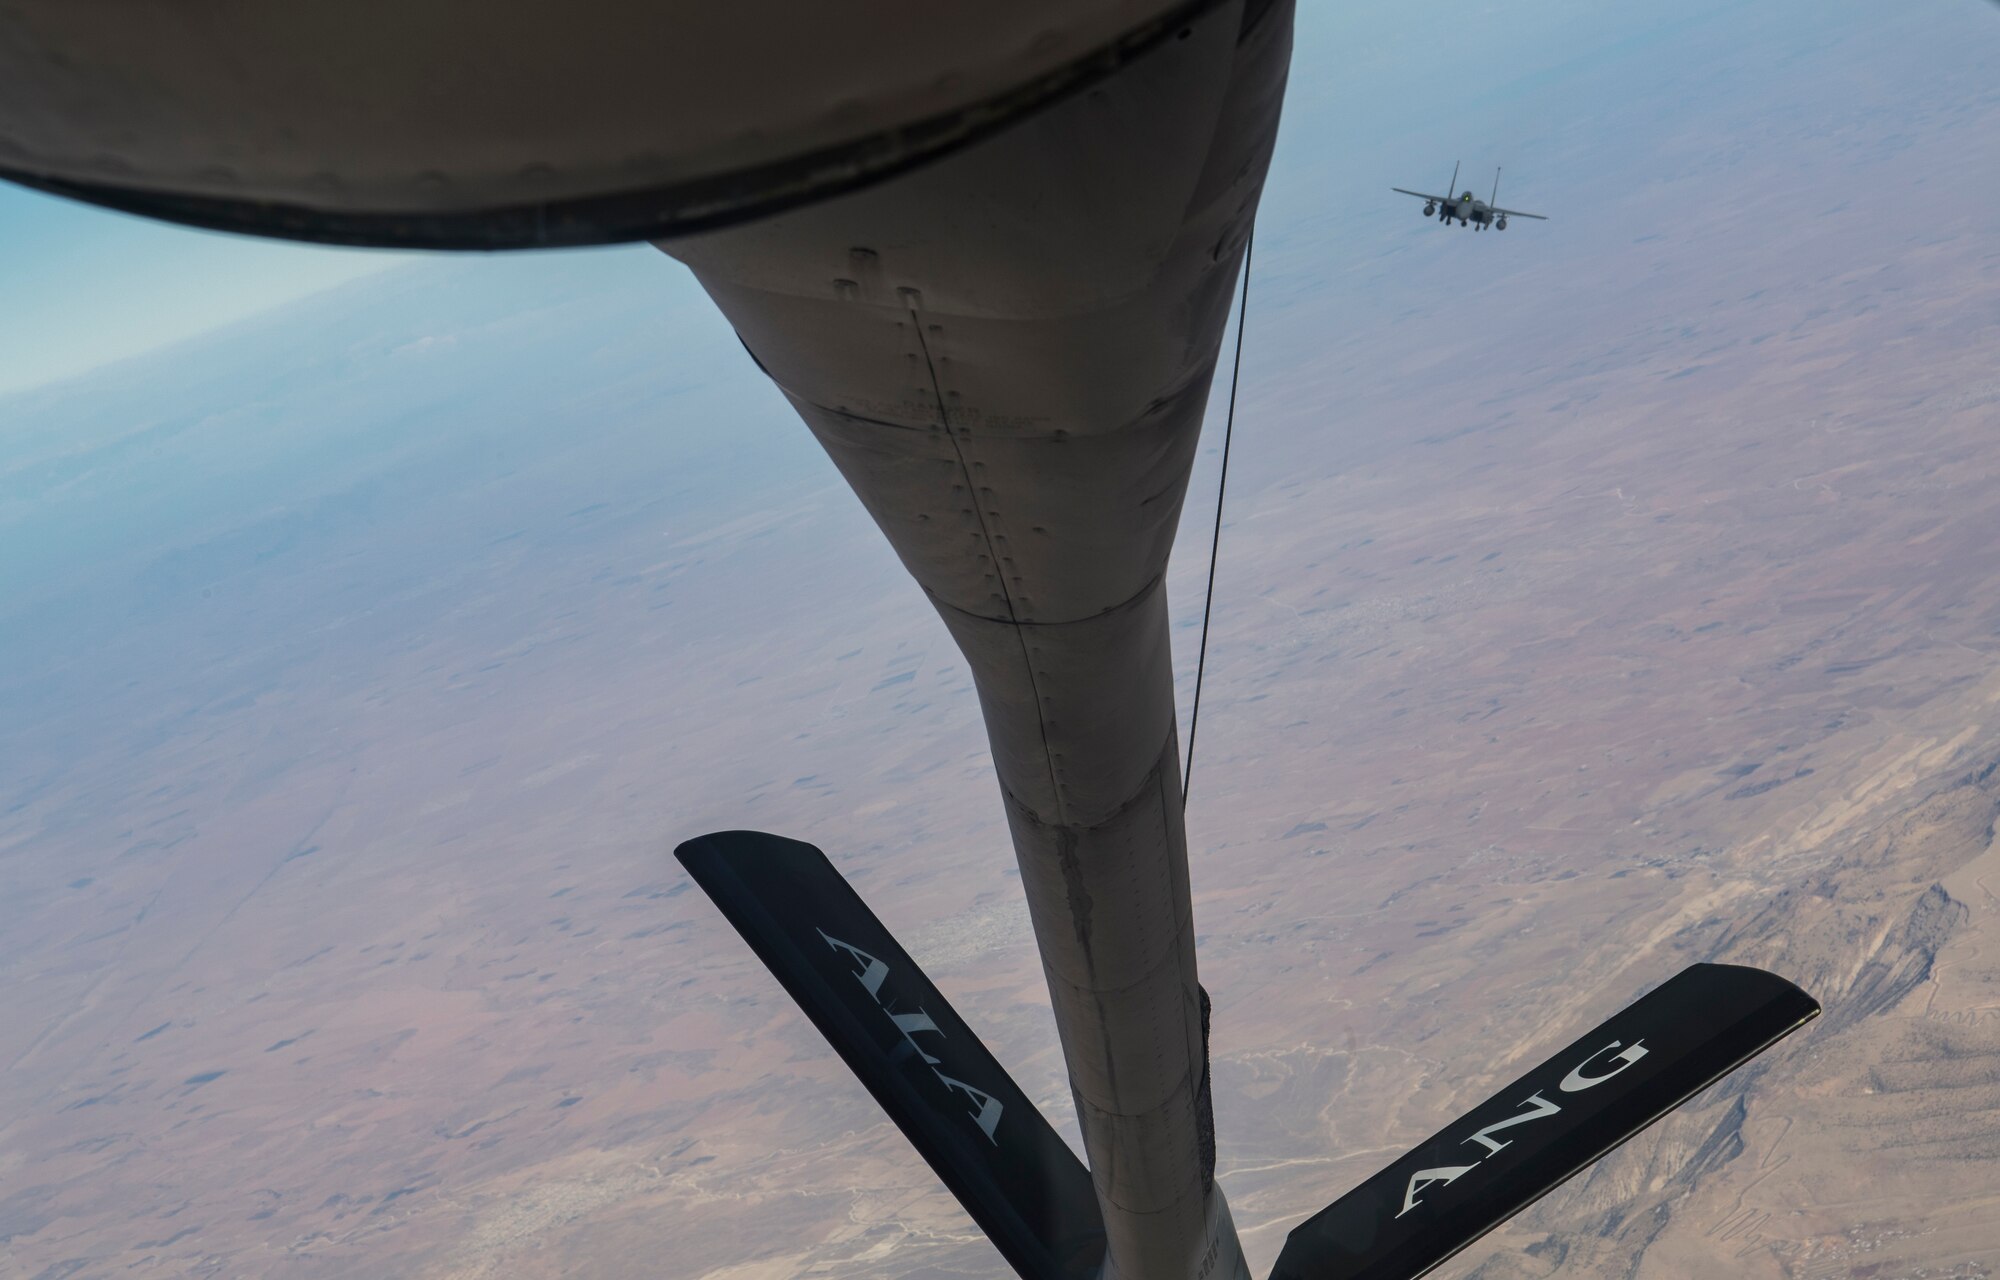 A U.S. Air Force KC-135 Stratotanker prepares to refuel an approaching U.S. Air Force F-15 Strike Eagle over northern Iraq, Nov. 20, 2019.